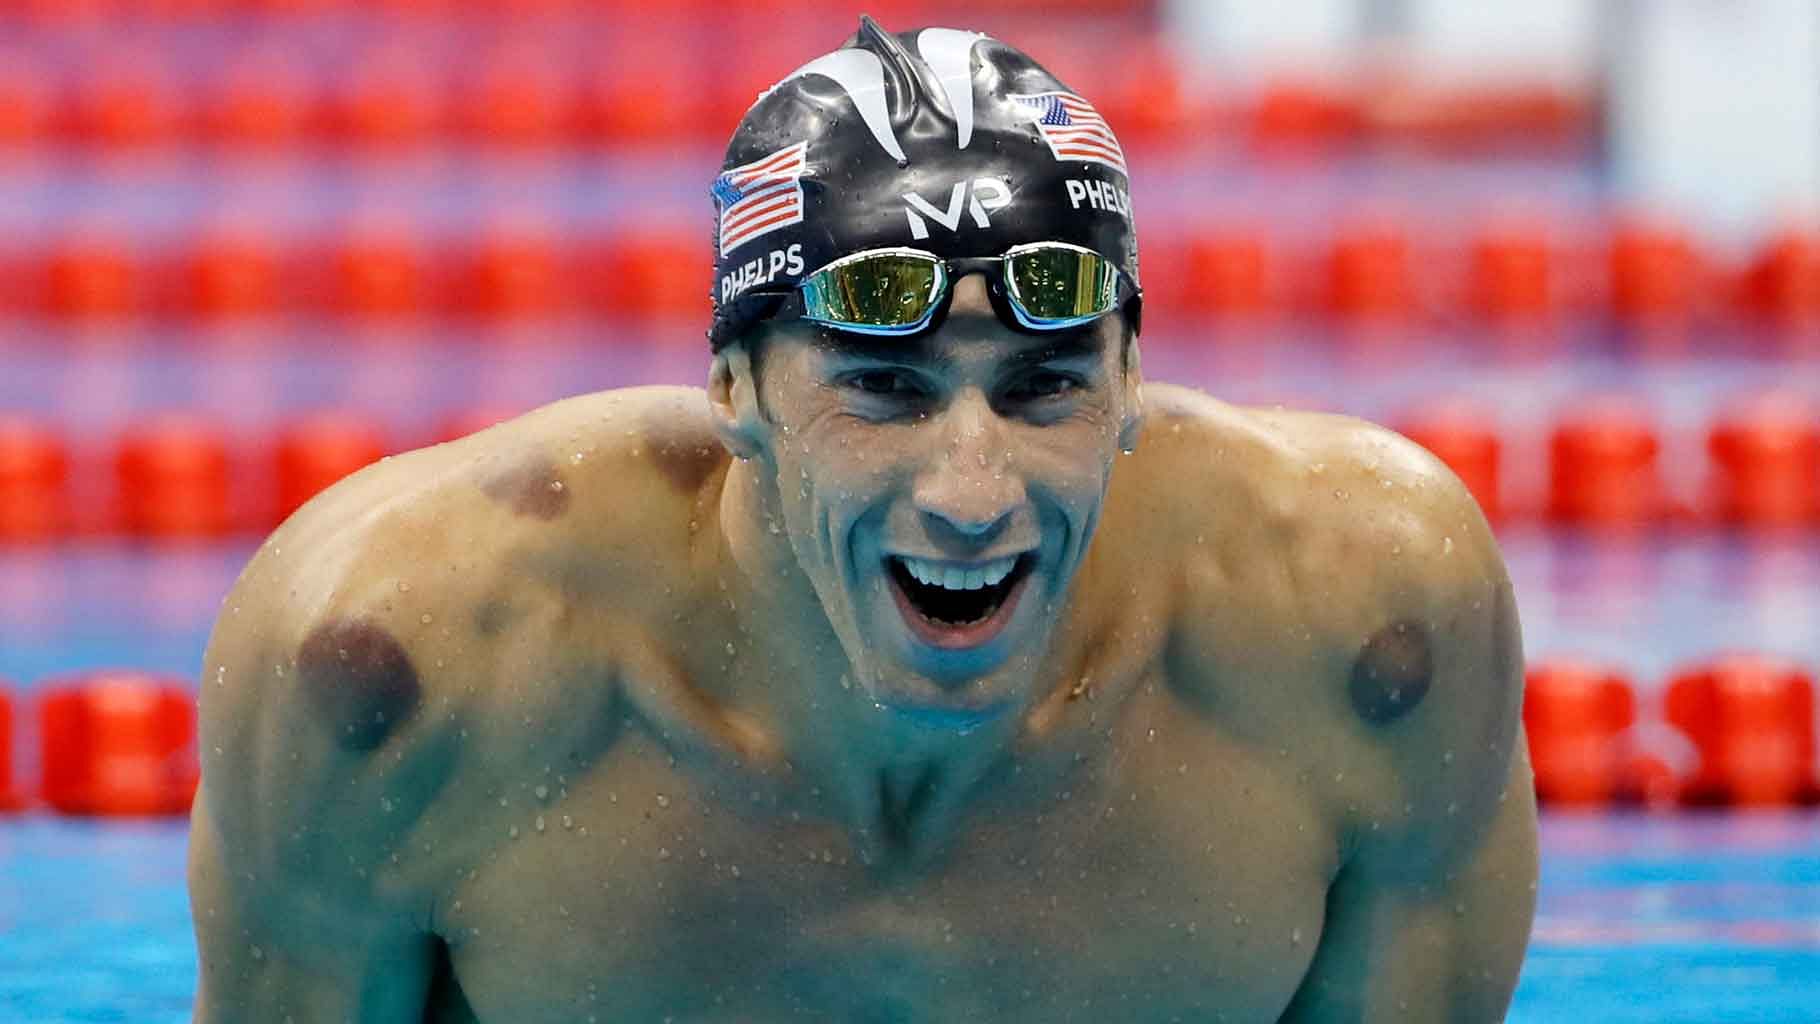 ‘Cupping’ marks can be seen on the shoulders of  Michael Phelps as he celebrates winning the gold medal in the men’s 200-meter butterfly. (Photo: AP)